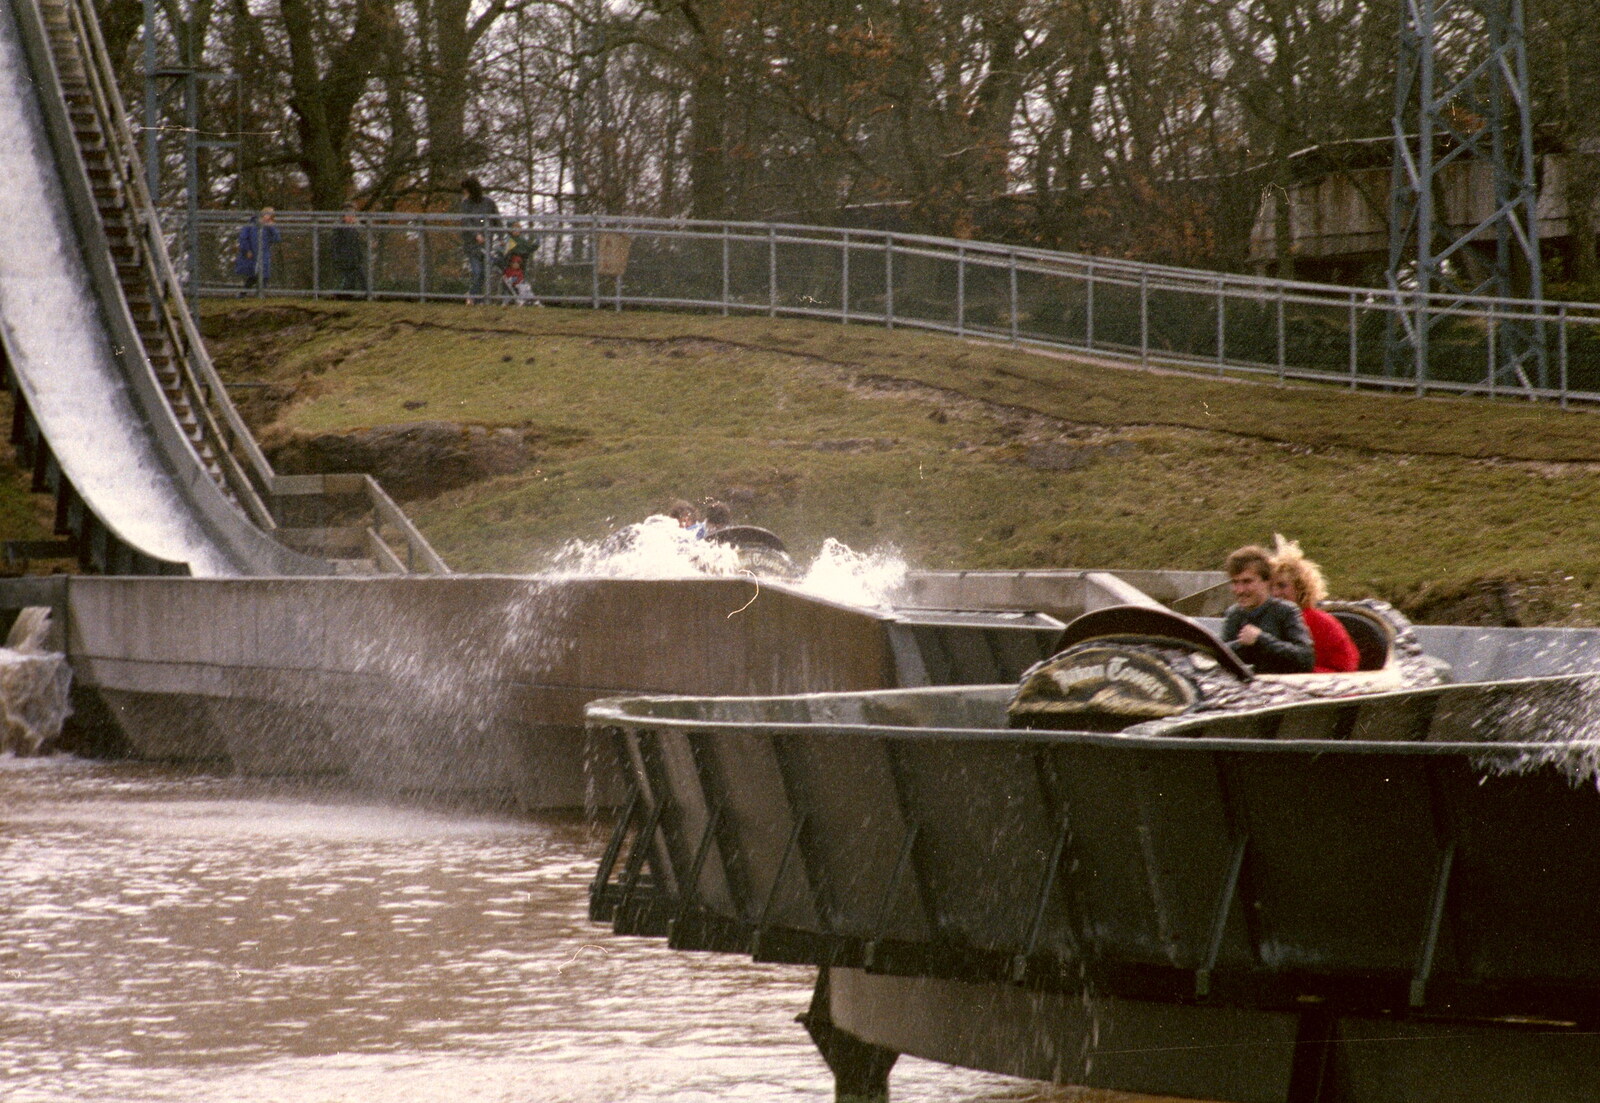 The log flume from Easter With Sean in Macclesfield, Cheshire - 6th April 1986